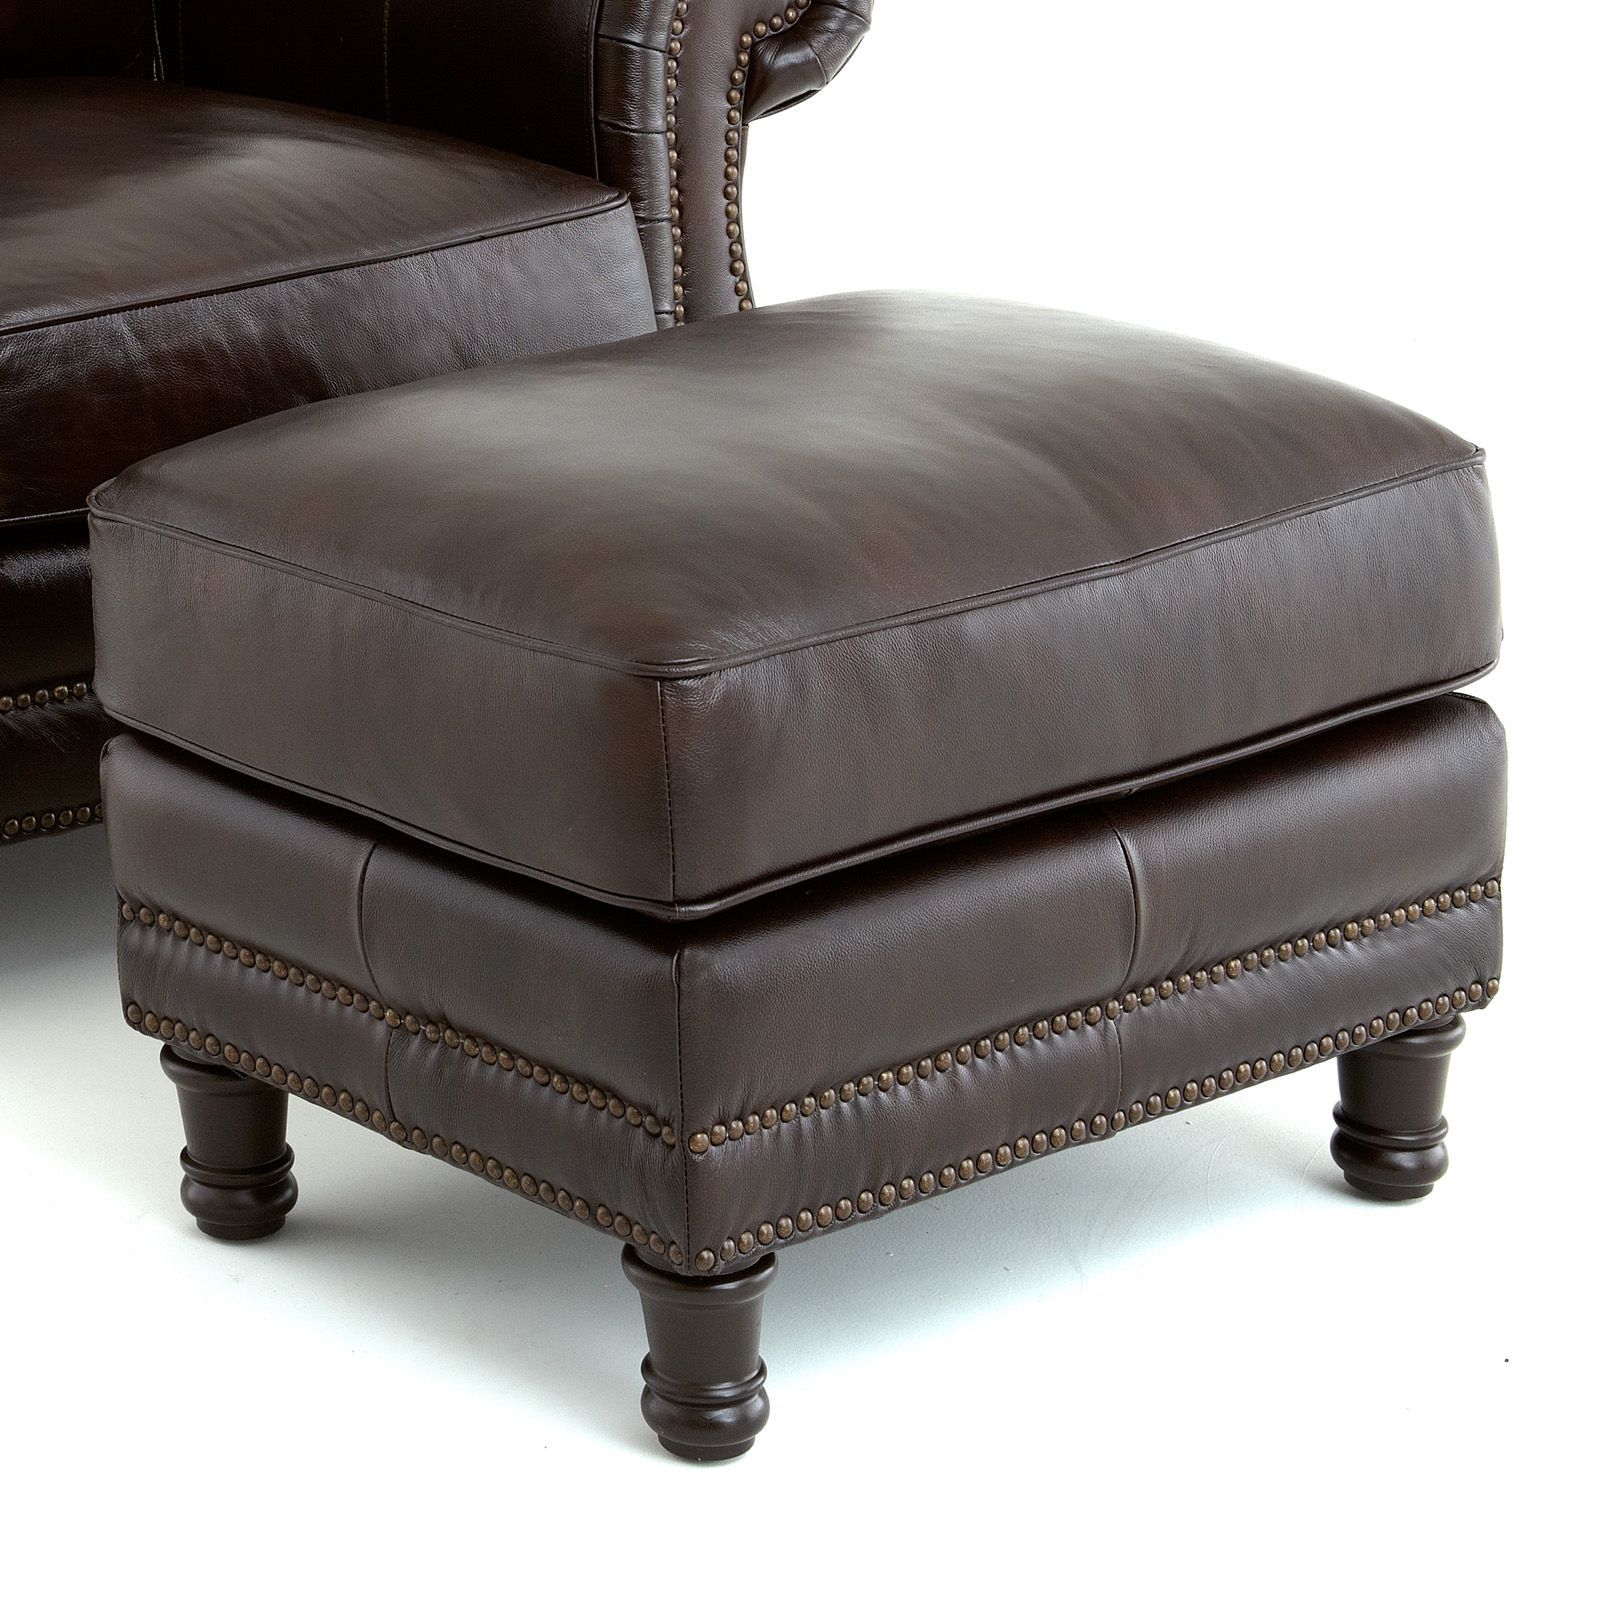 Steve Silver Chateau Leather Ottoman – Antique Chocolate Brown Throughout Weathered Silver Leather Hide Pouf Ottomans (View 17 of 20)